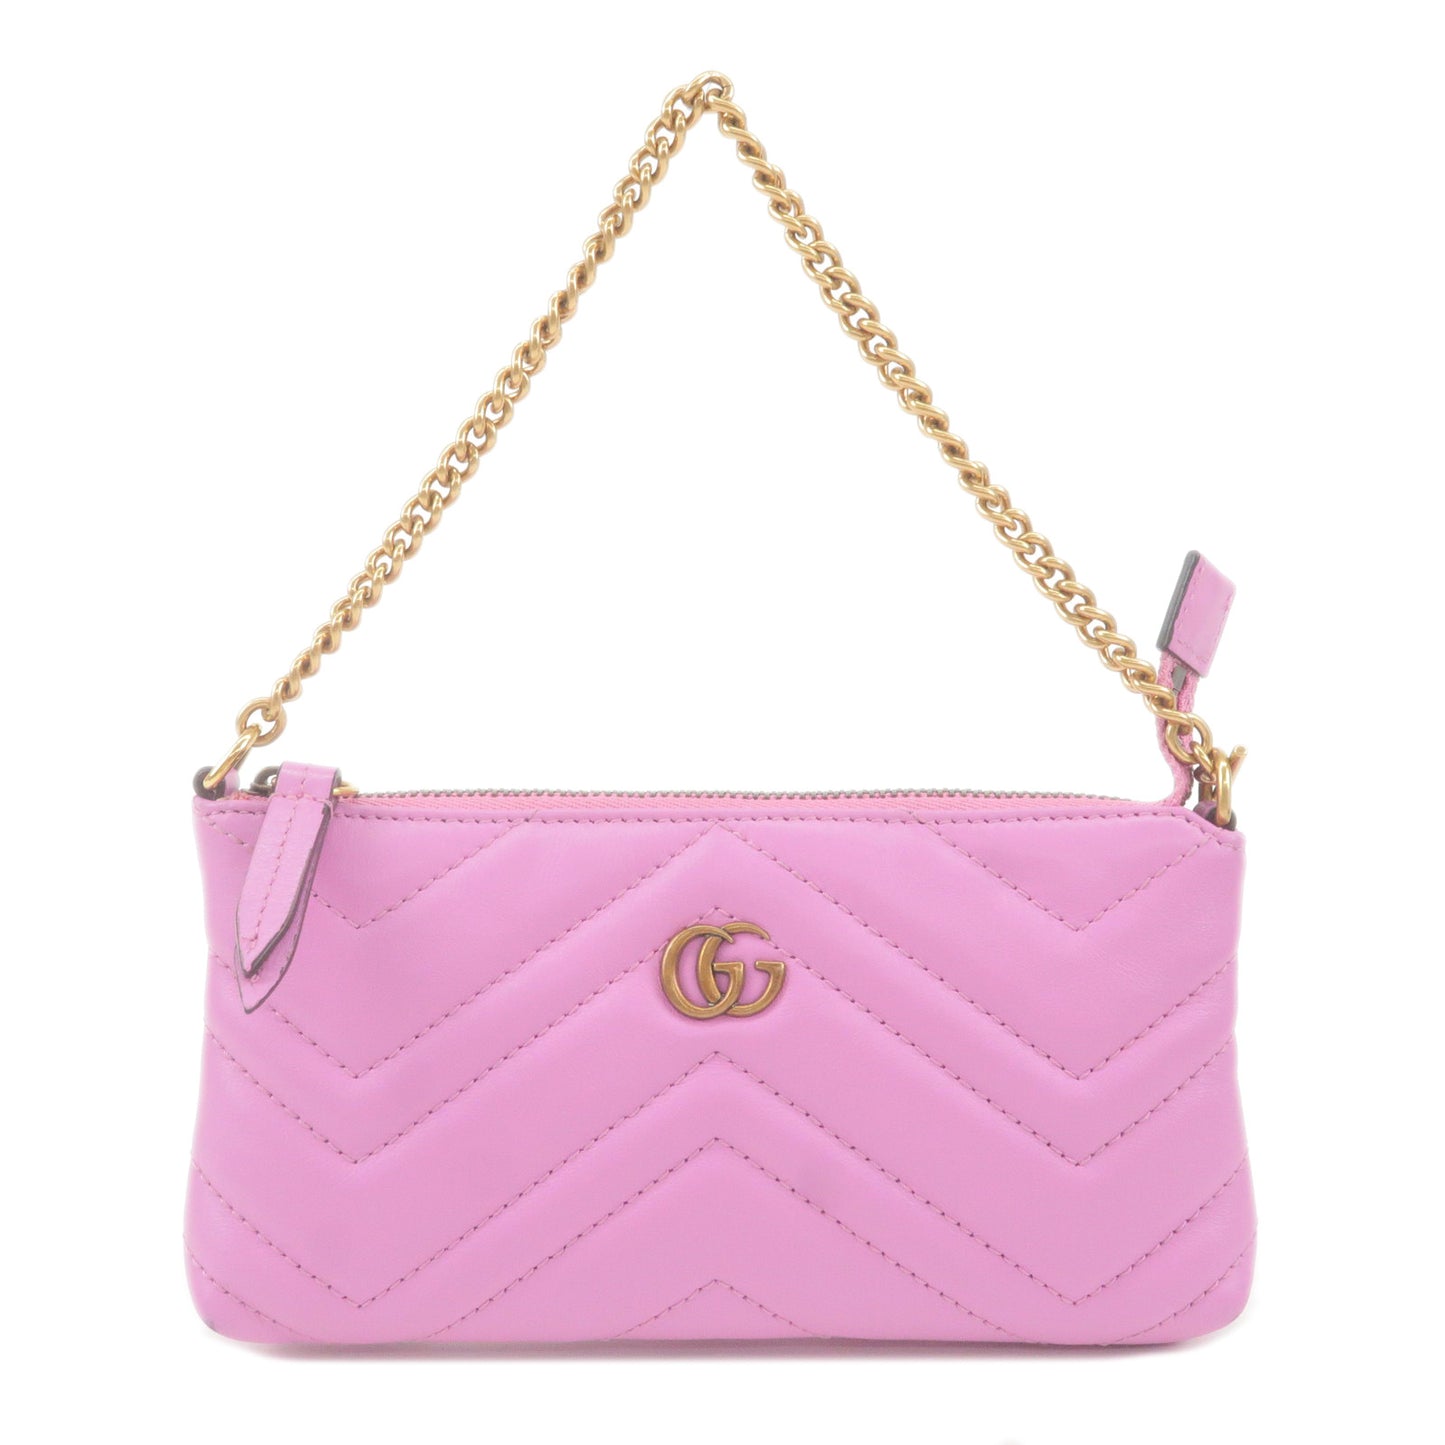 GUCCI-GG-Marmont-Leather-Chain-Pouch-Hand-Bag-Purse-Pink-443129